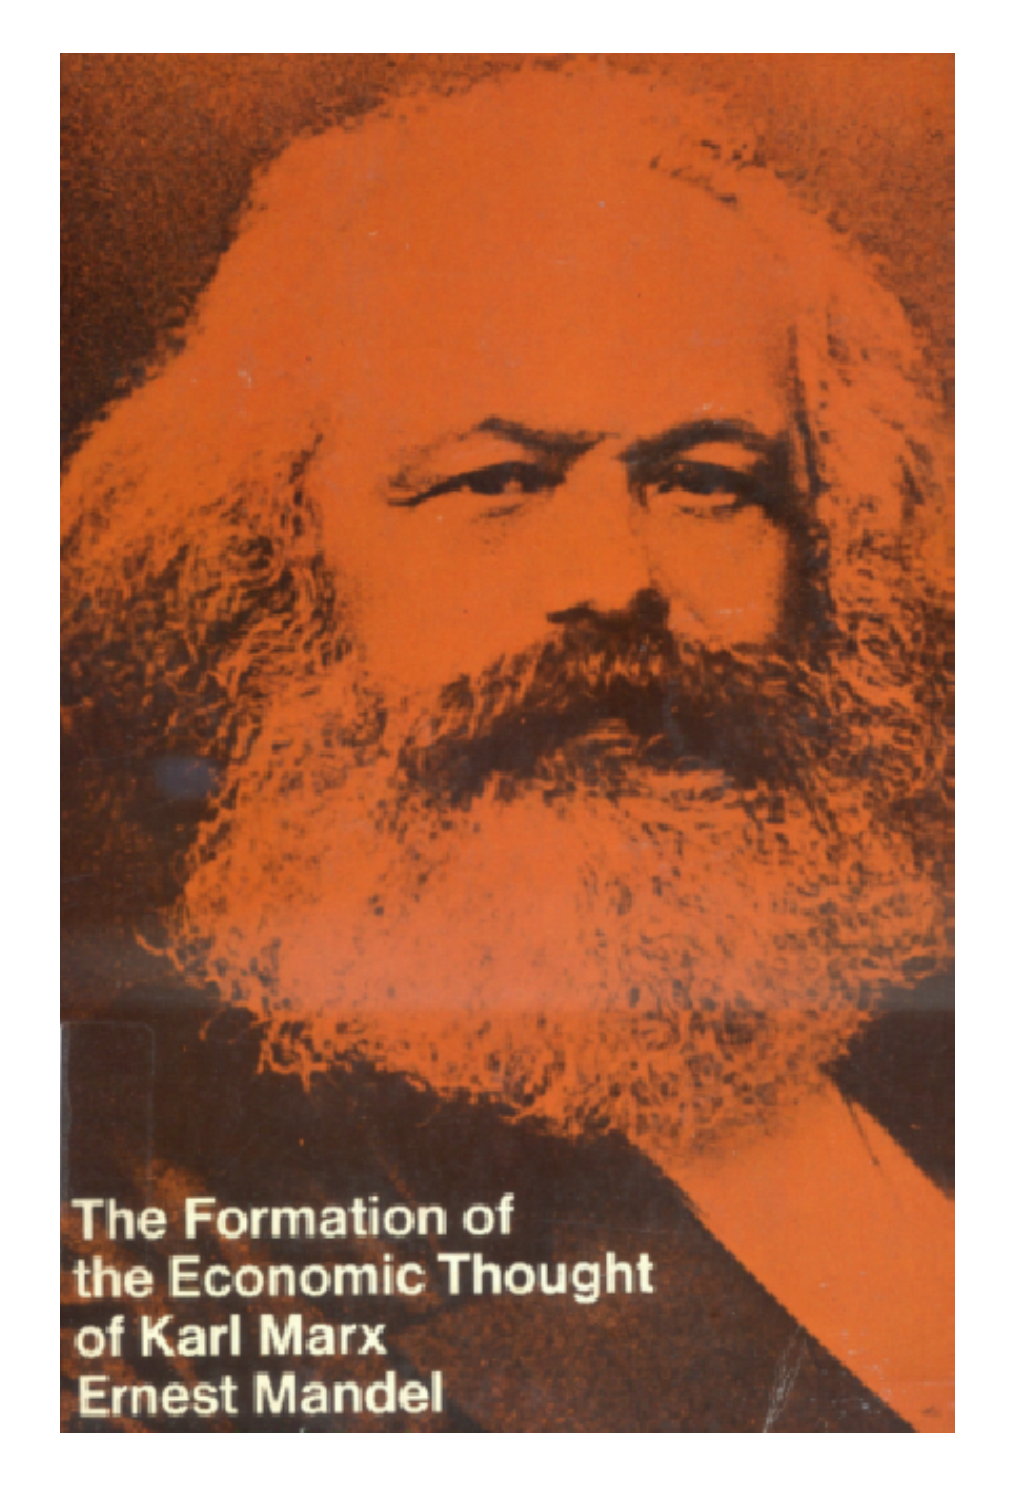 Formation of the Economic Thought of Karl Marx 1843 to Capital